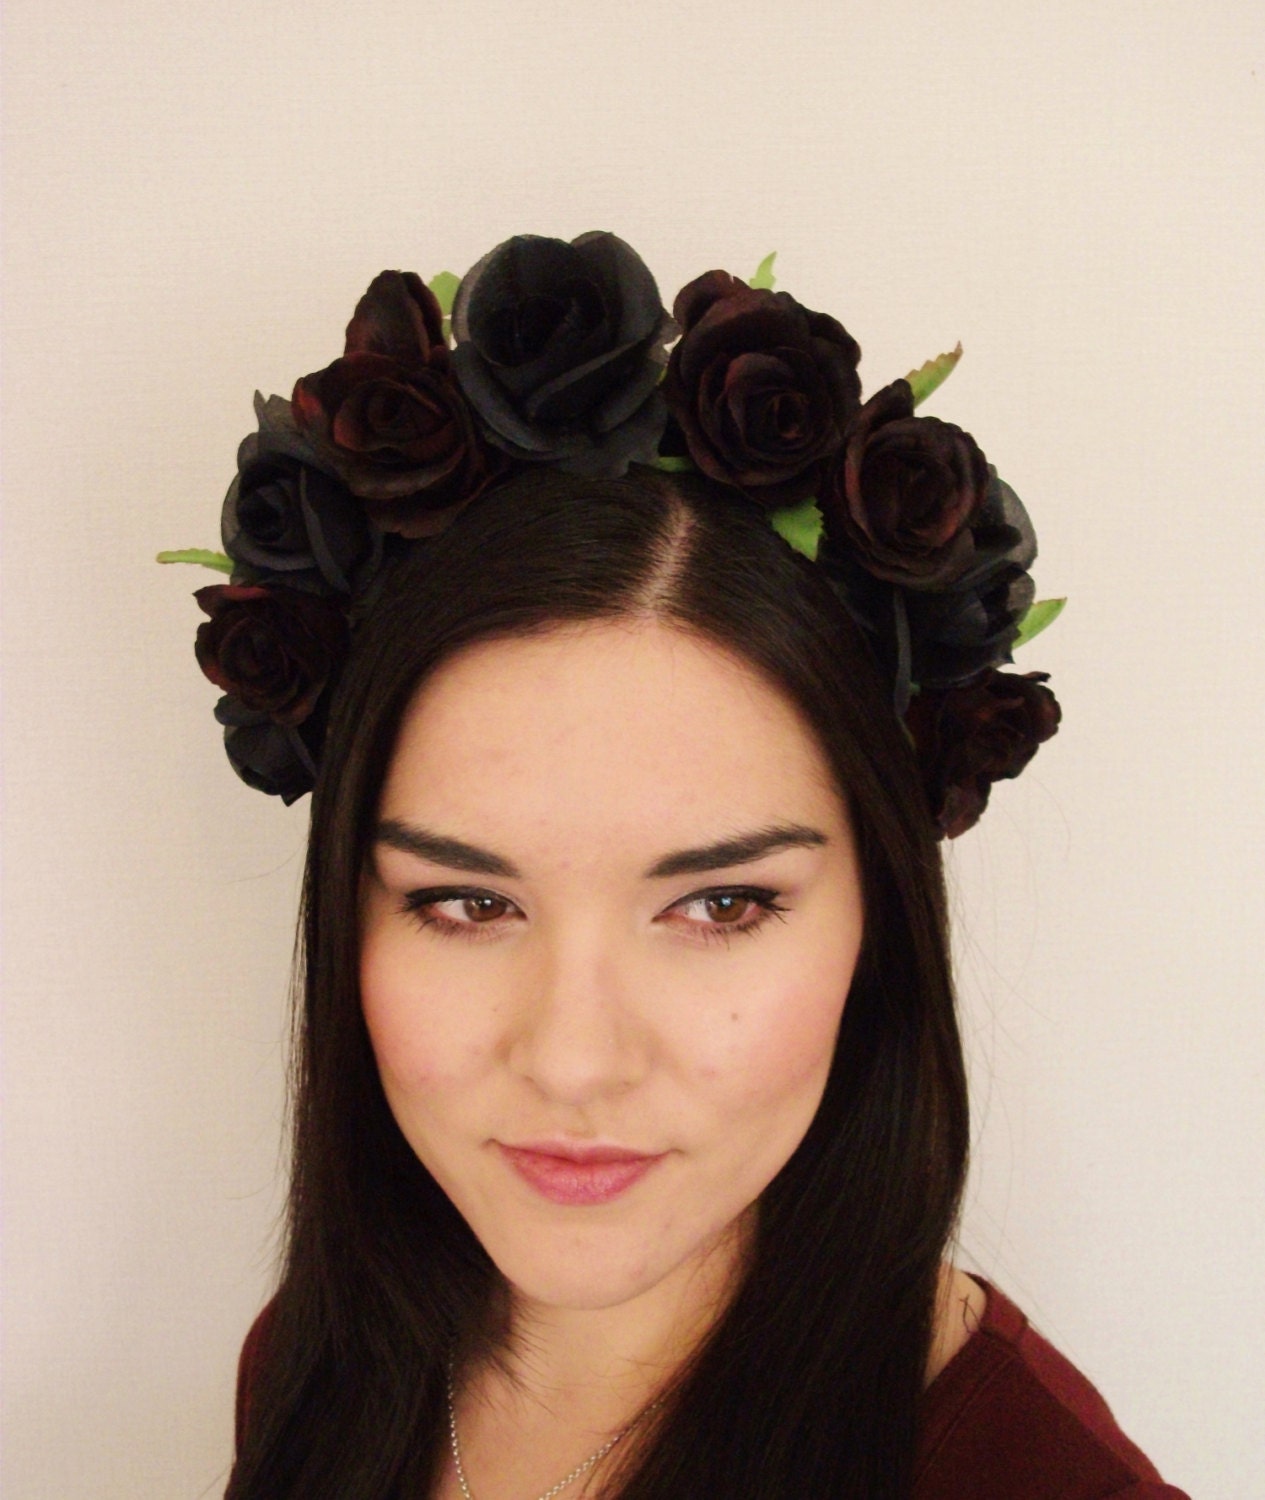 Red Black Rose Flower Crown - floral headband, flower crown, floral wreath, fascinator - il_fullxfull.598219775_cabz